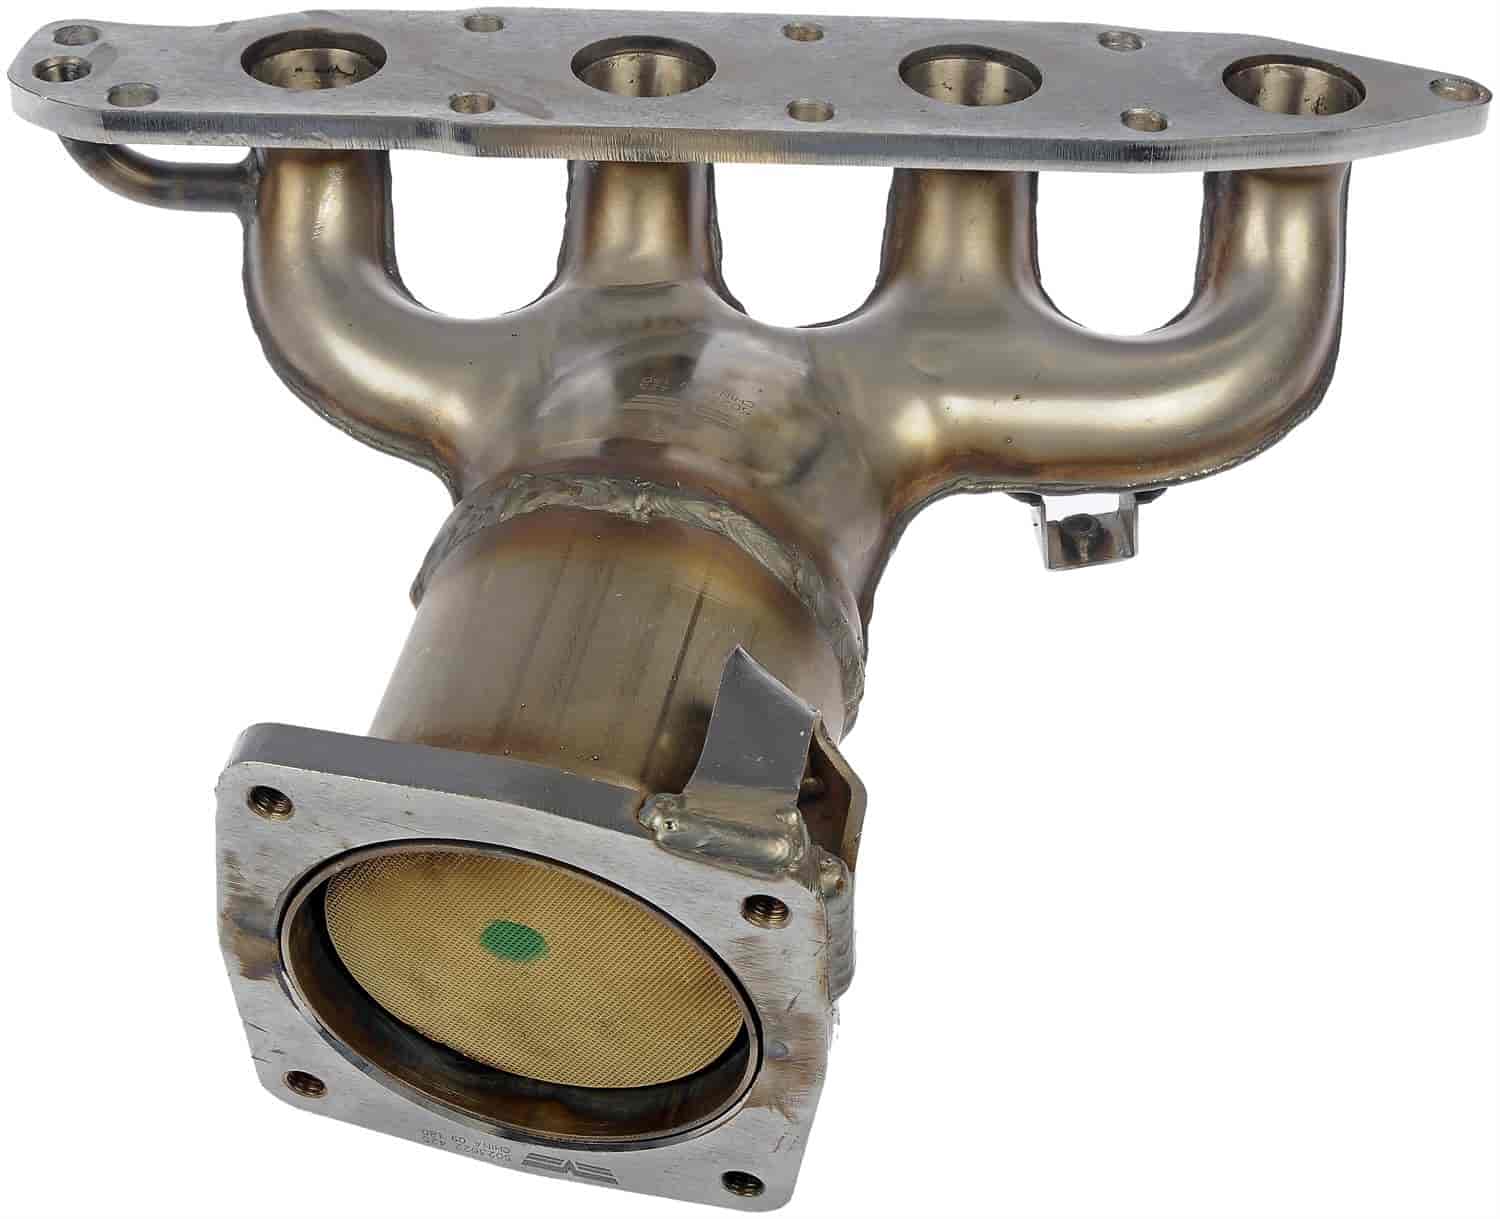 Manifold Converter Carb Compliant For Legal Sale In Ny Ca